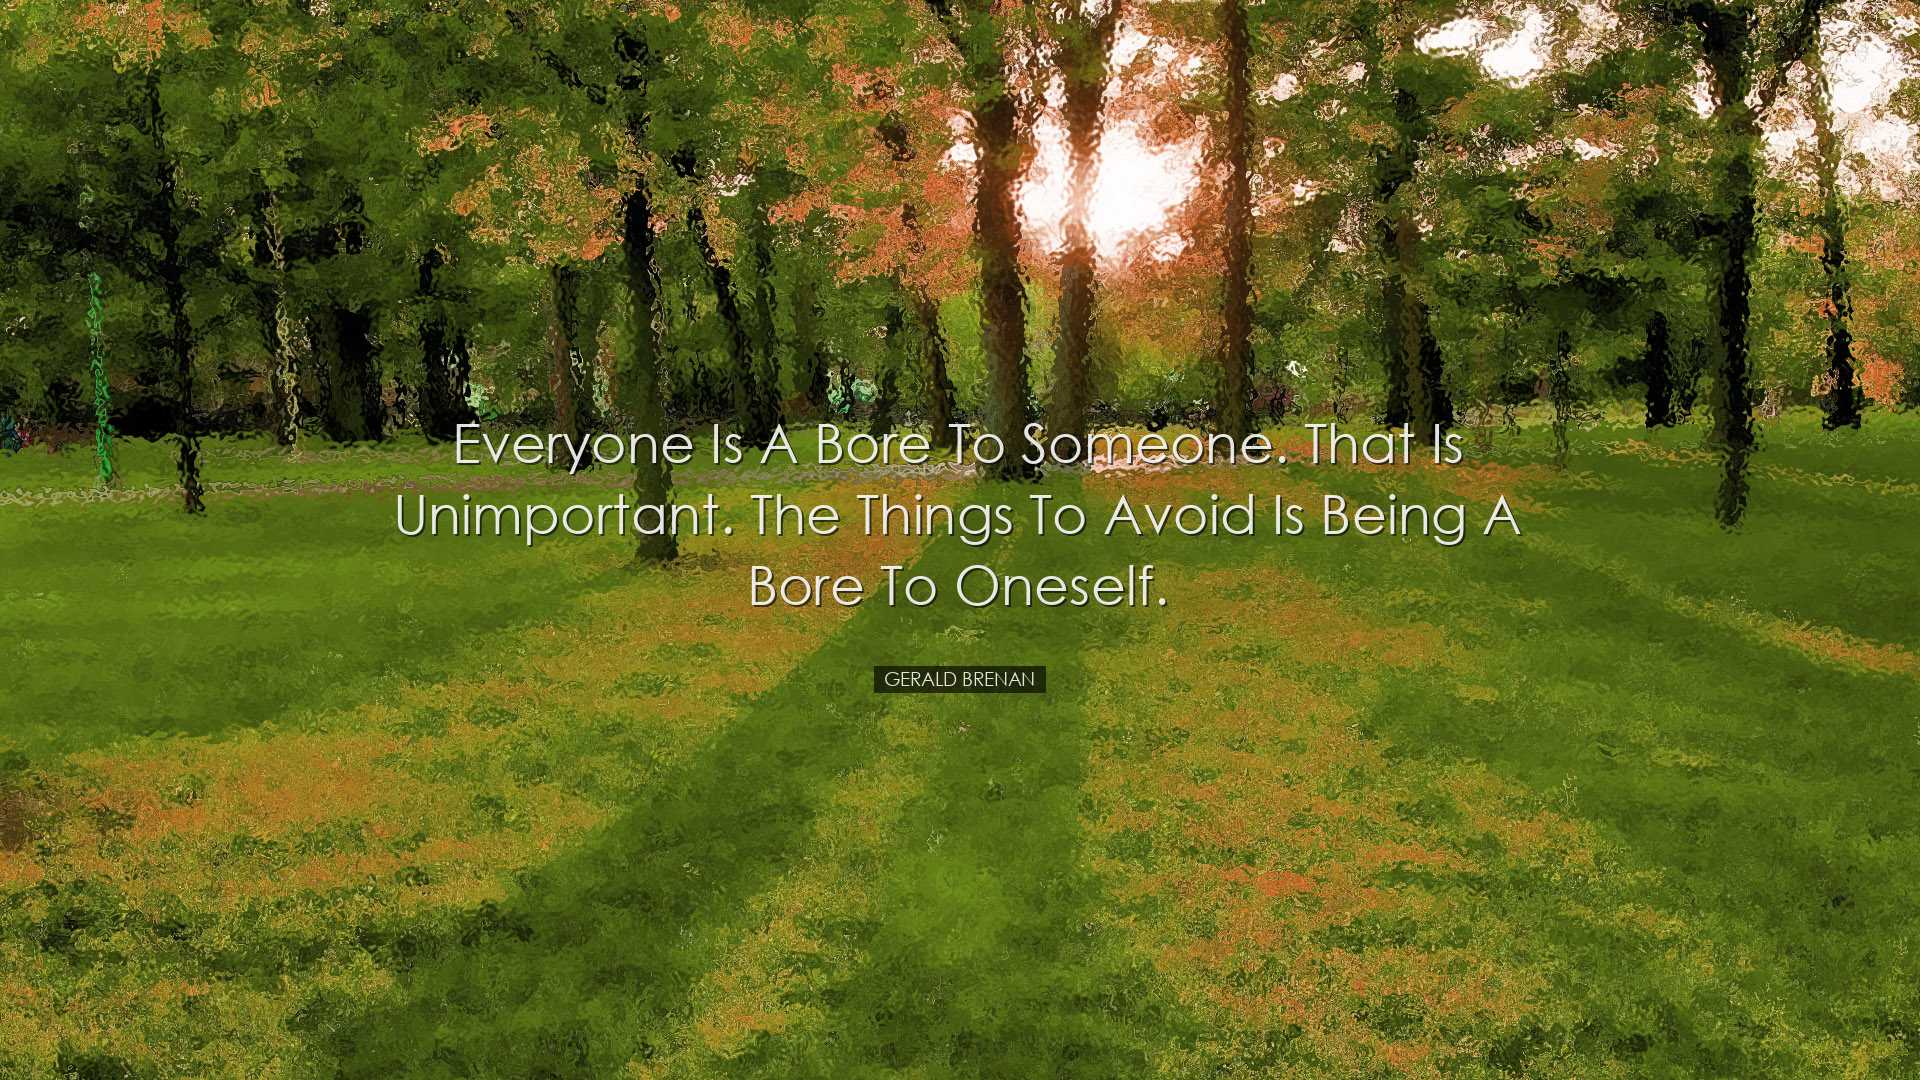 Everyone is a bore to someone. That is unimportant. The things to